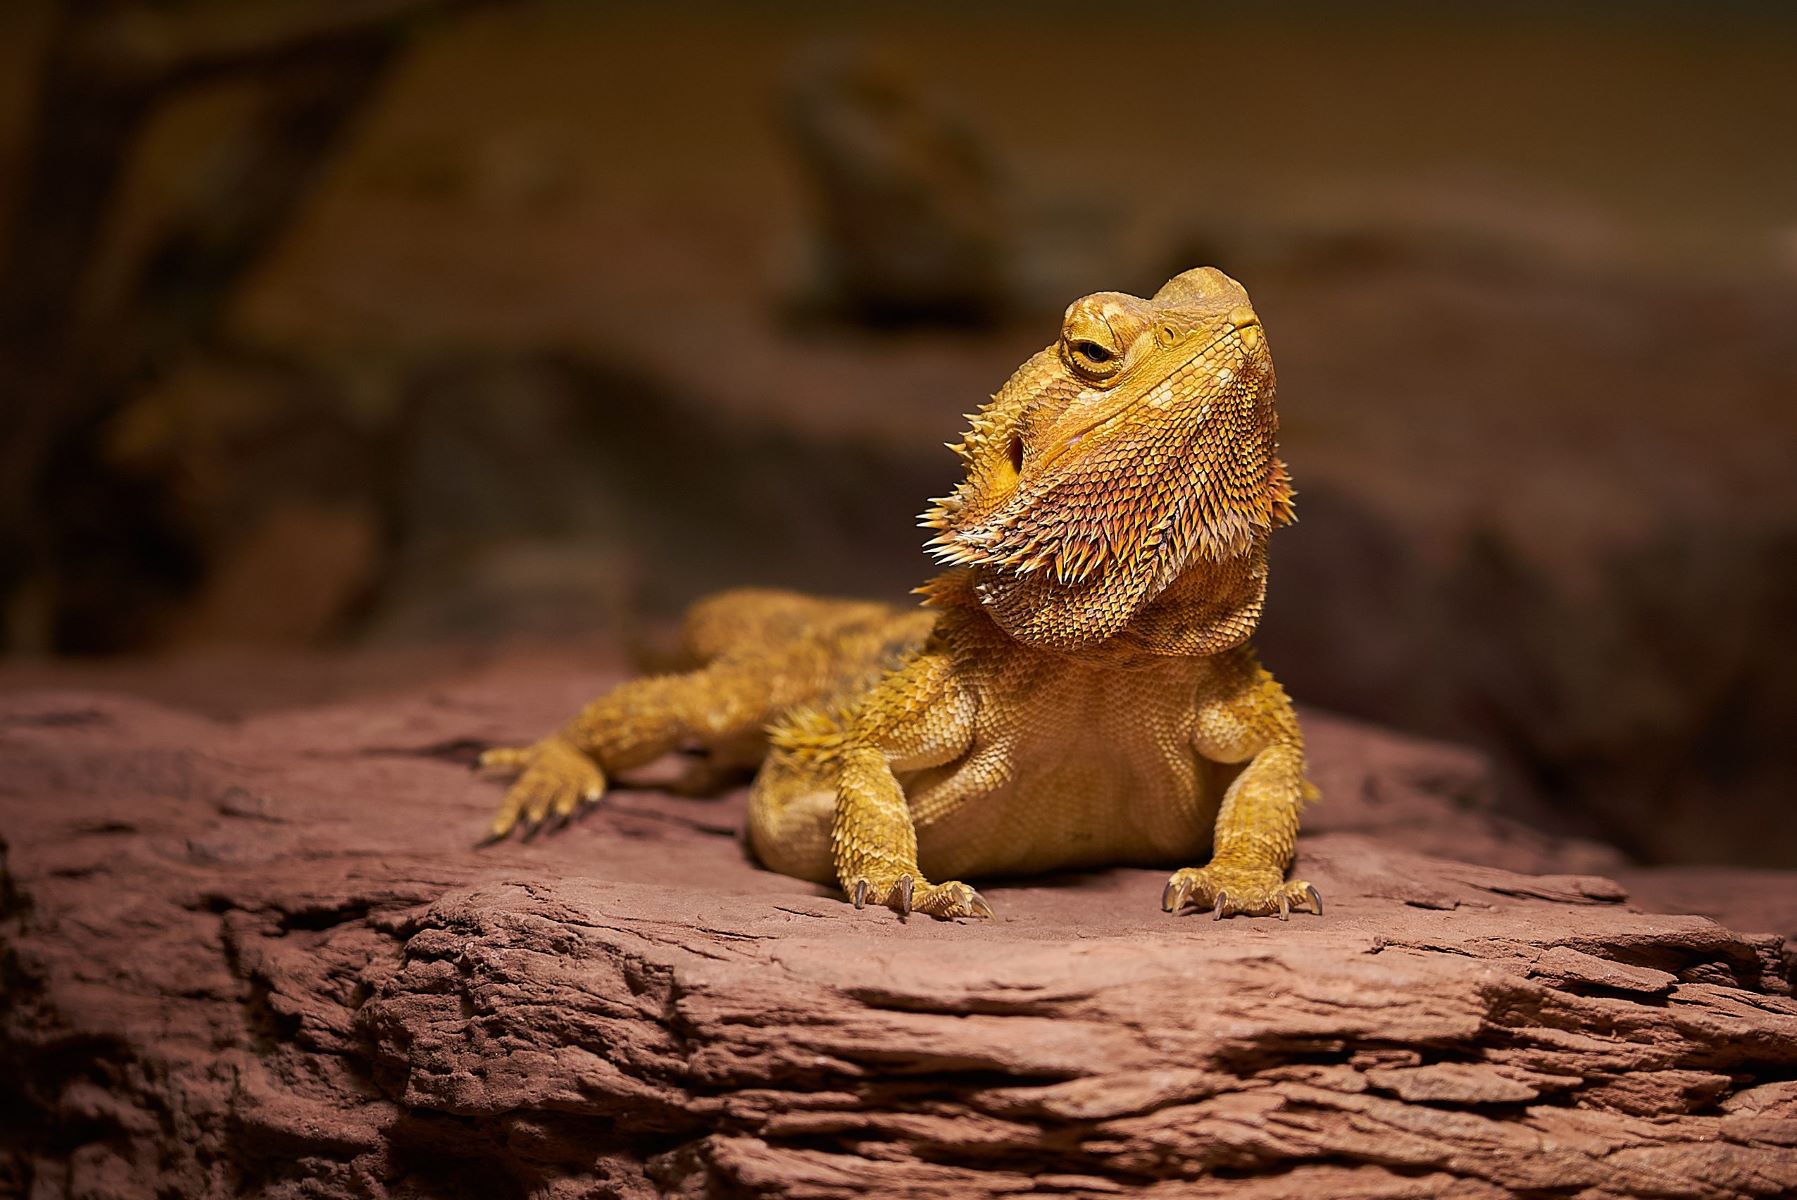 Unleash The Hidden Sounds Of Bearded Dragons! Beyond Hissing And Barking, What Other Noises Do They Make?